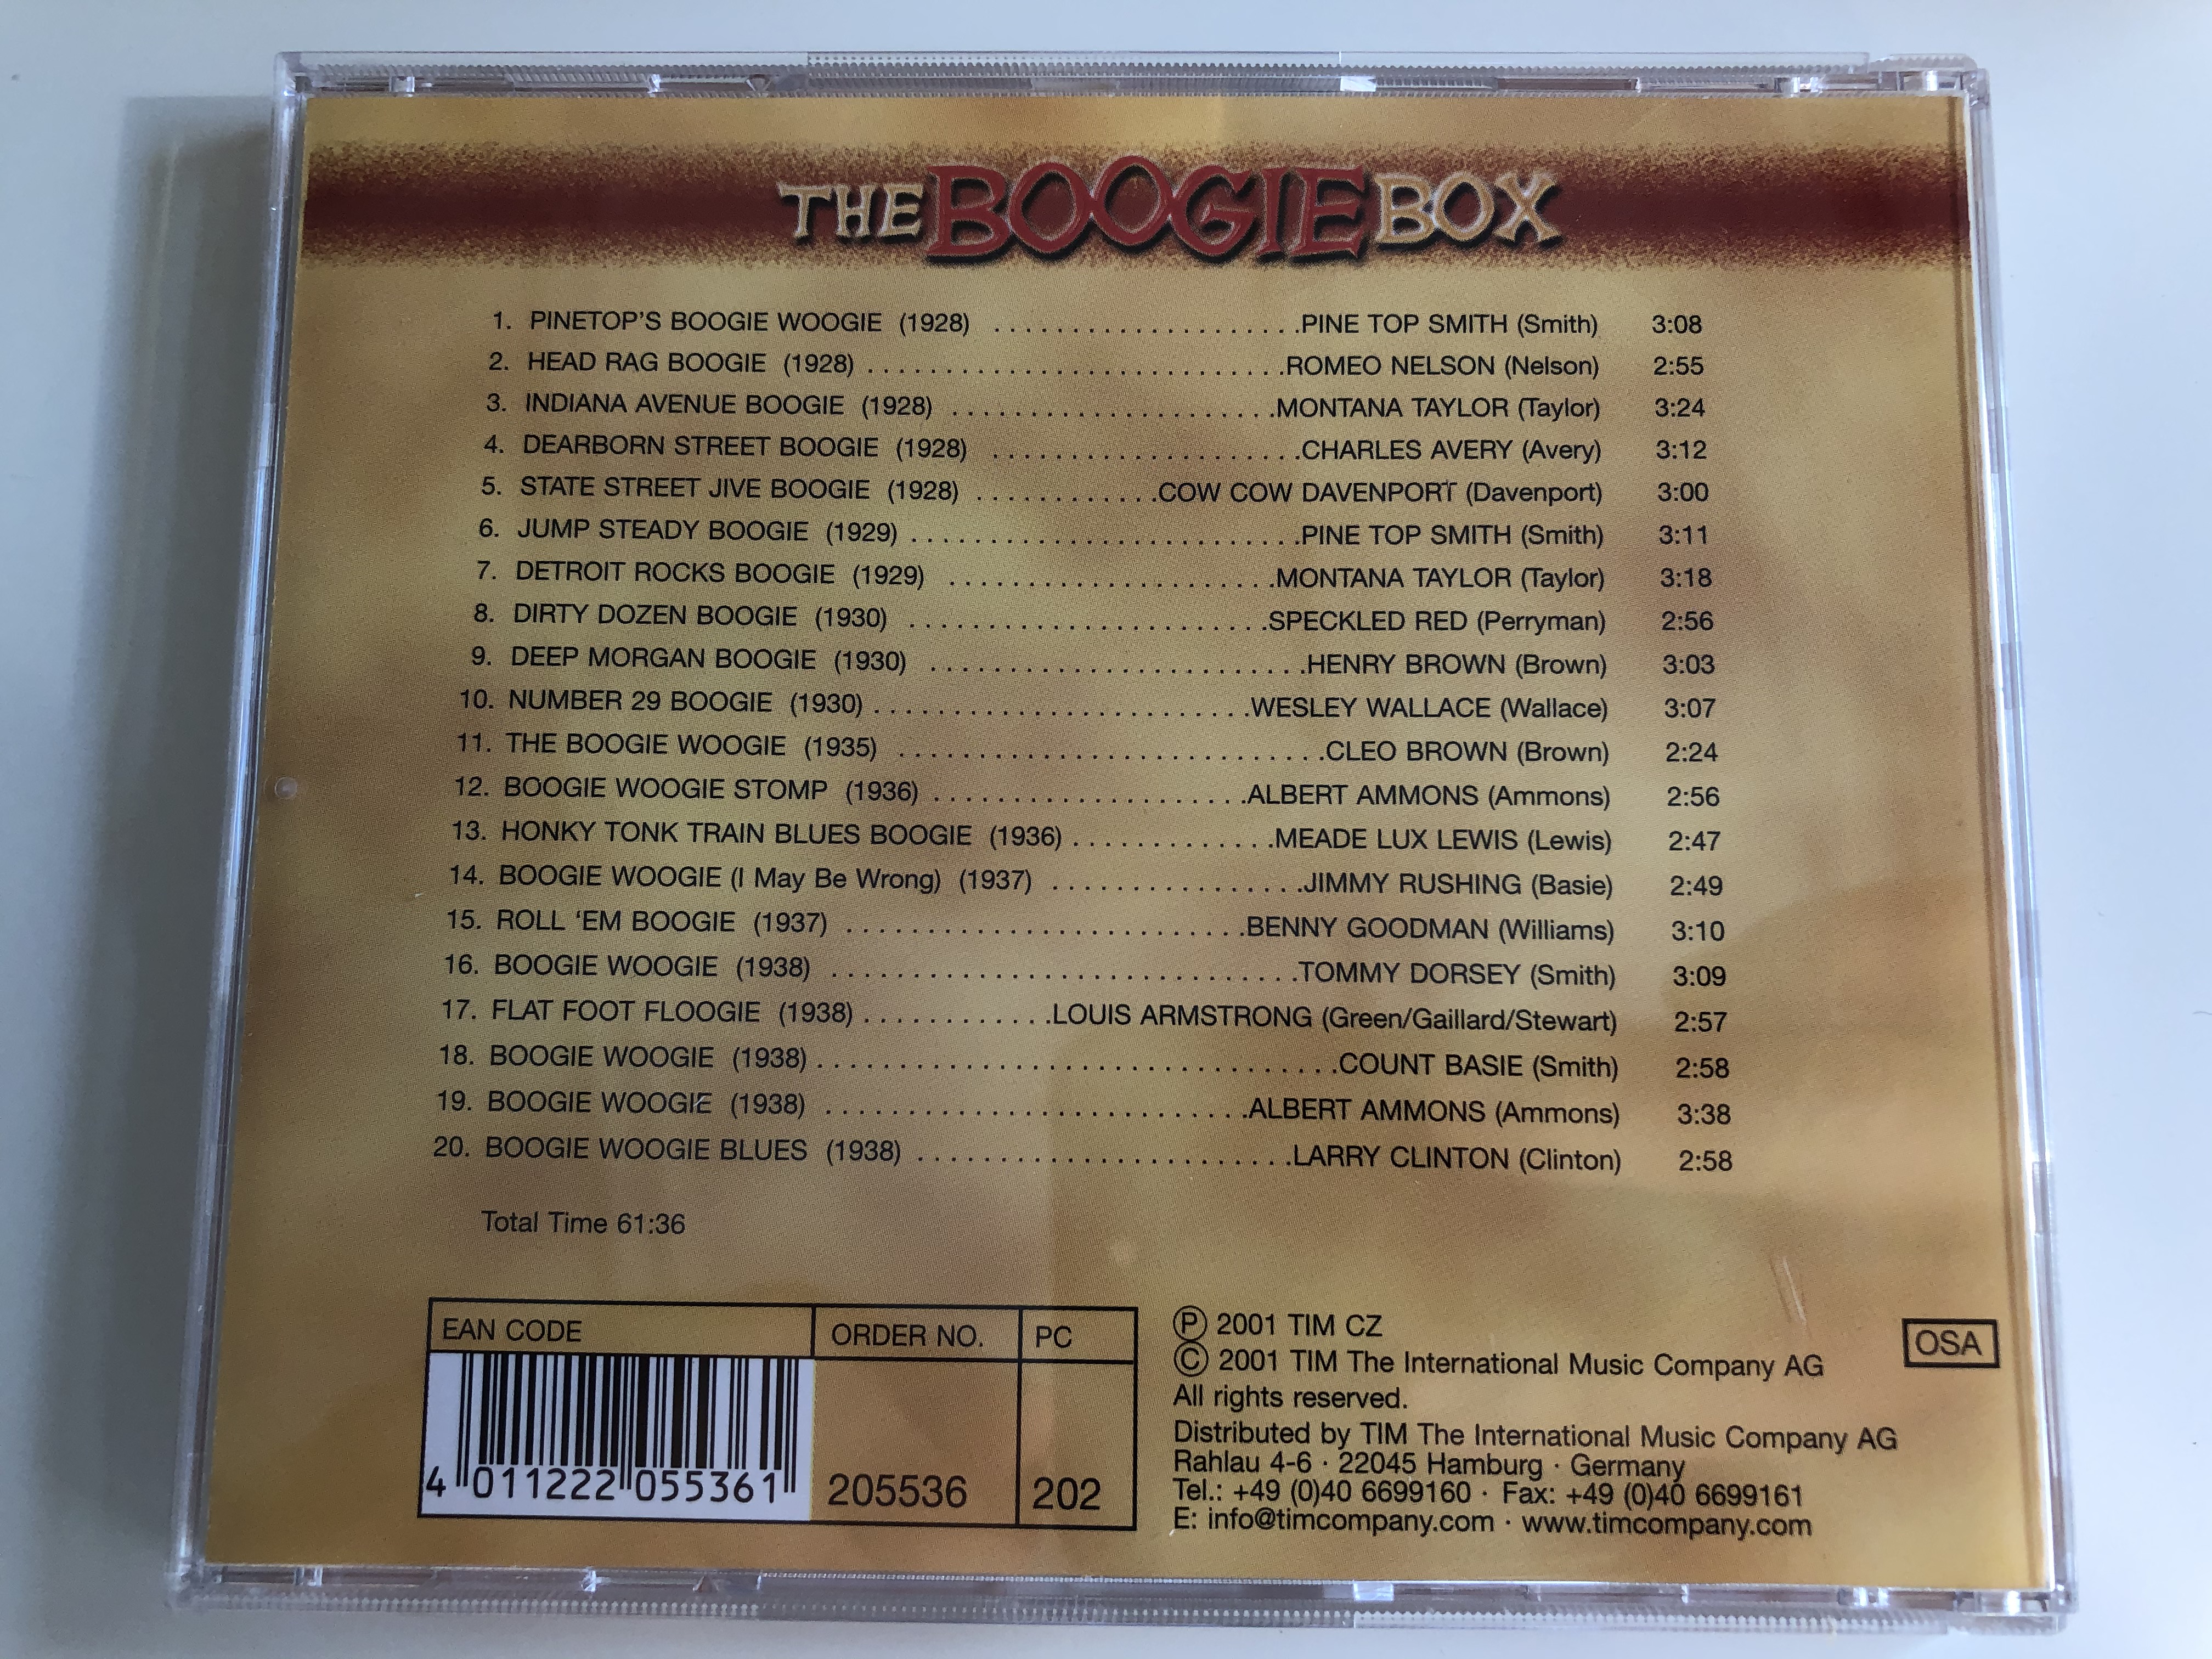 the-boogie-box-vol.-1-weesley-wallace-montana-taylor-cow-cow-davenport-spreckled-red-albert-ammons-pine-top-smith-henry-brown-pine-top-smith-larry-clinton-romeo-nelson-louis-armstrong-...-tim-cz-a.jpg